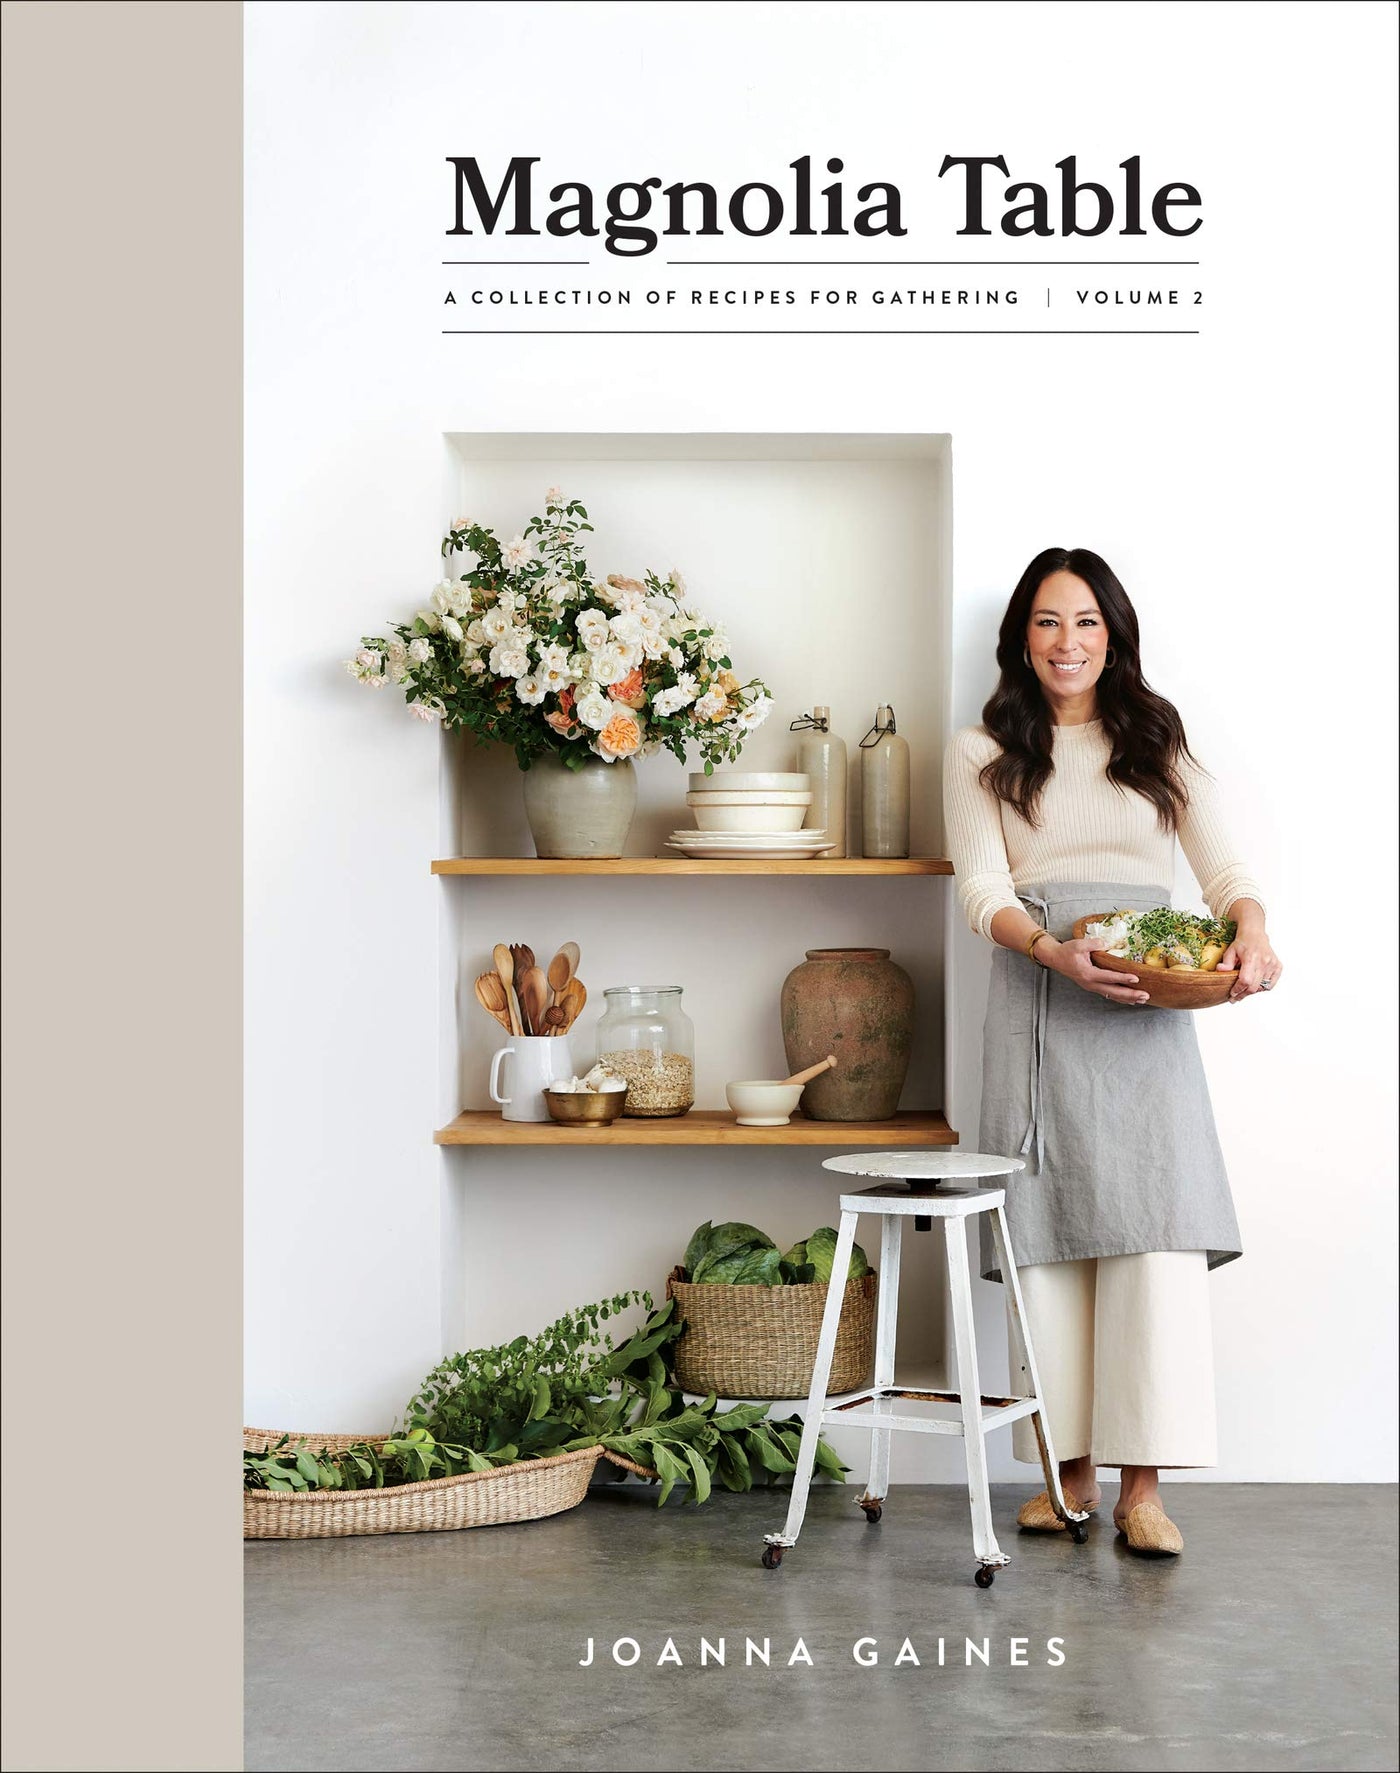 Magnolia Table, Volume 2: A Collection of Recipes for Gathering - Hardcover Book 